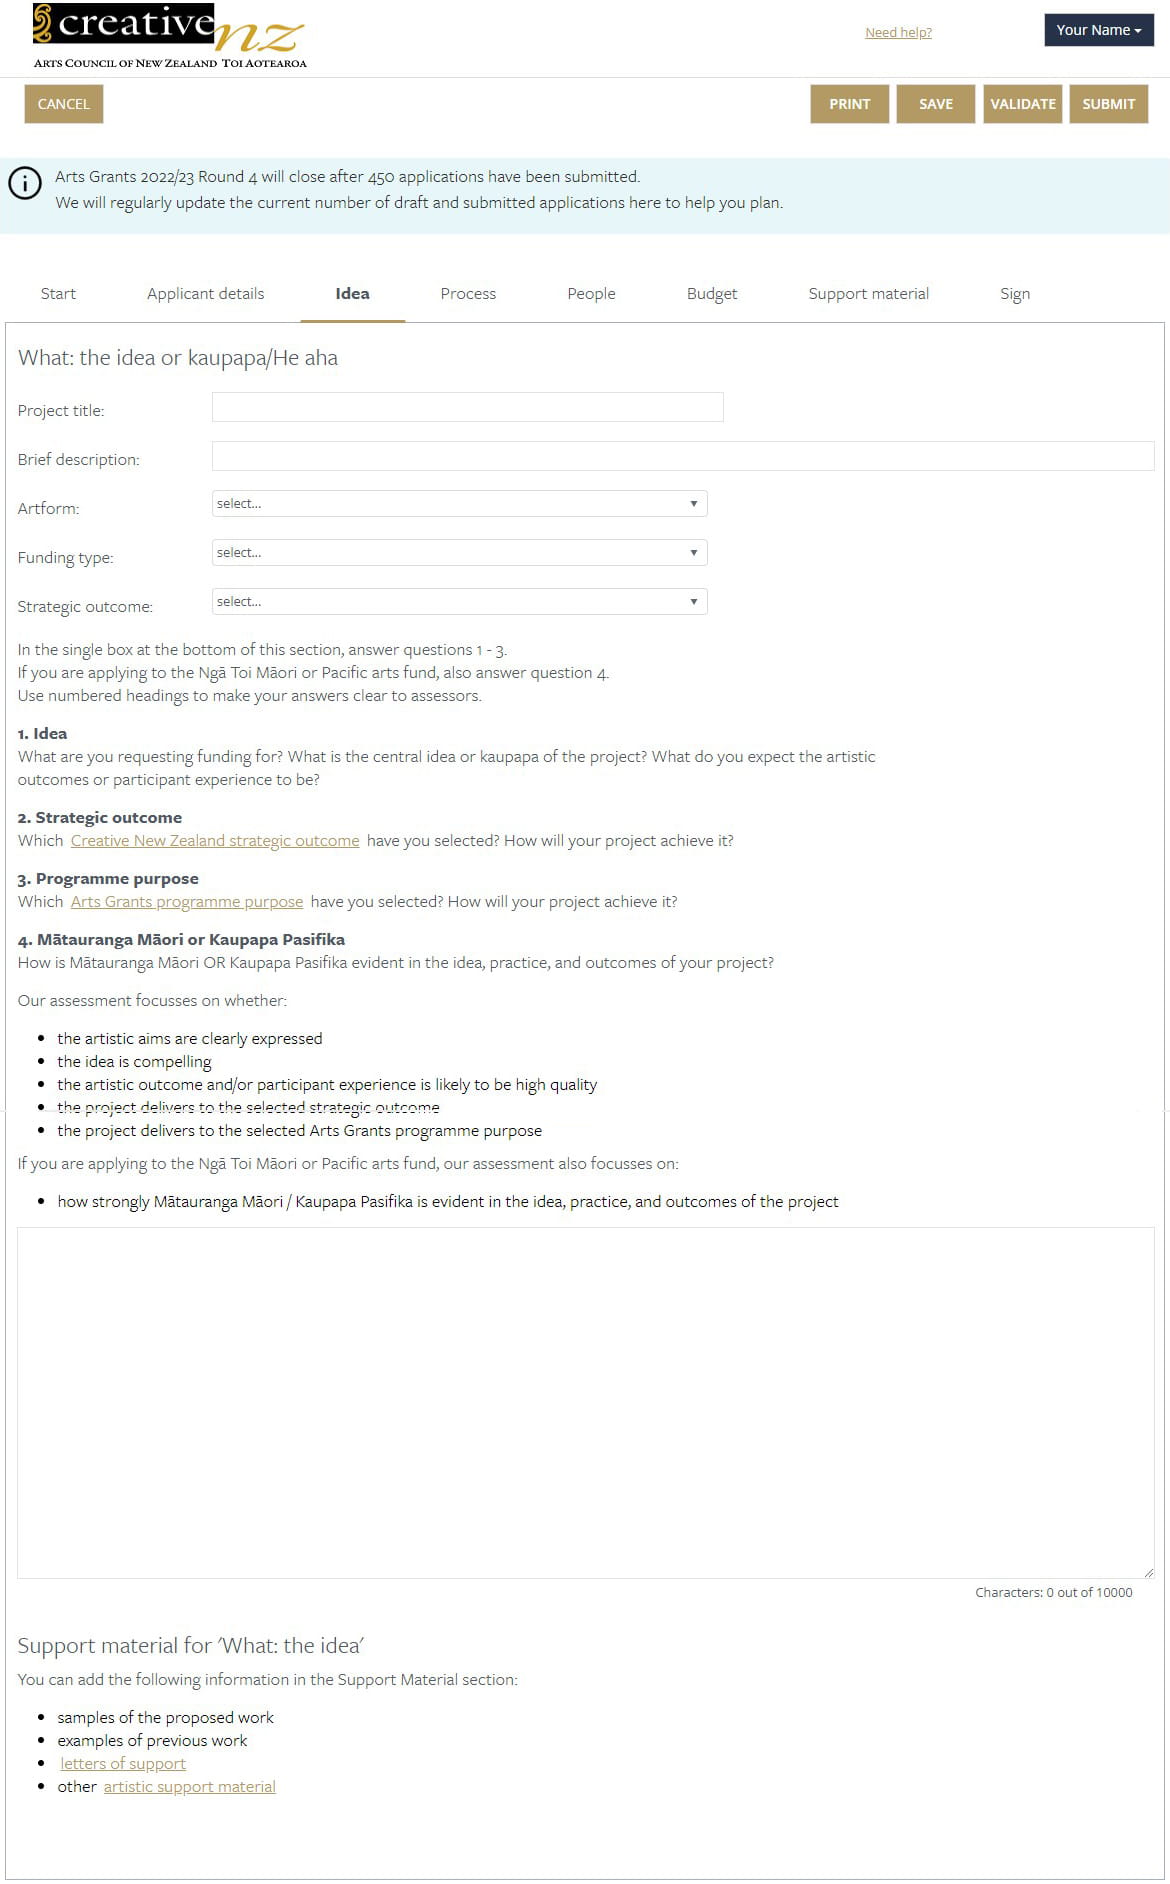 Preview of the Idea section of an application form